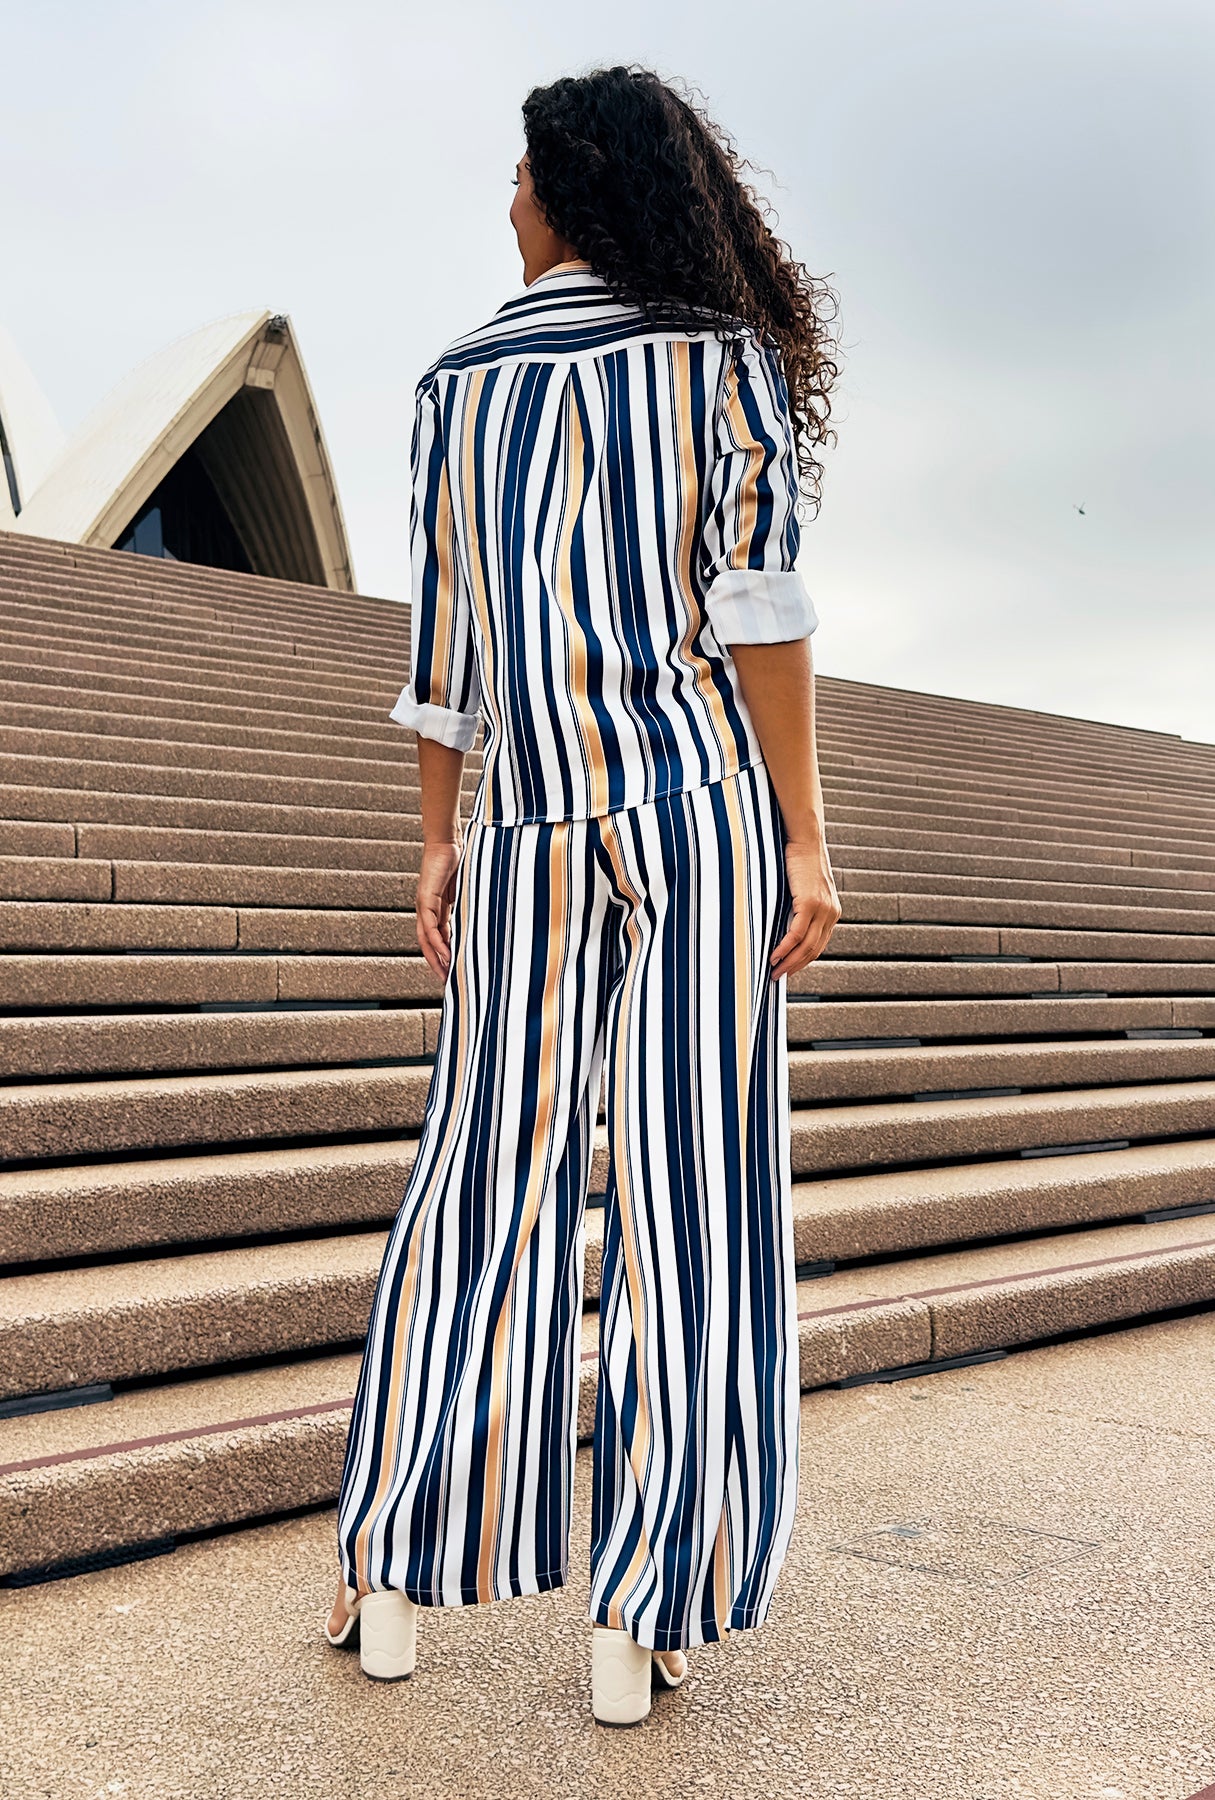 Bring The Glam Pant - Navy Stripe